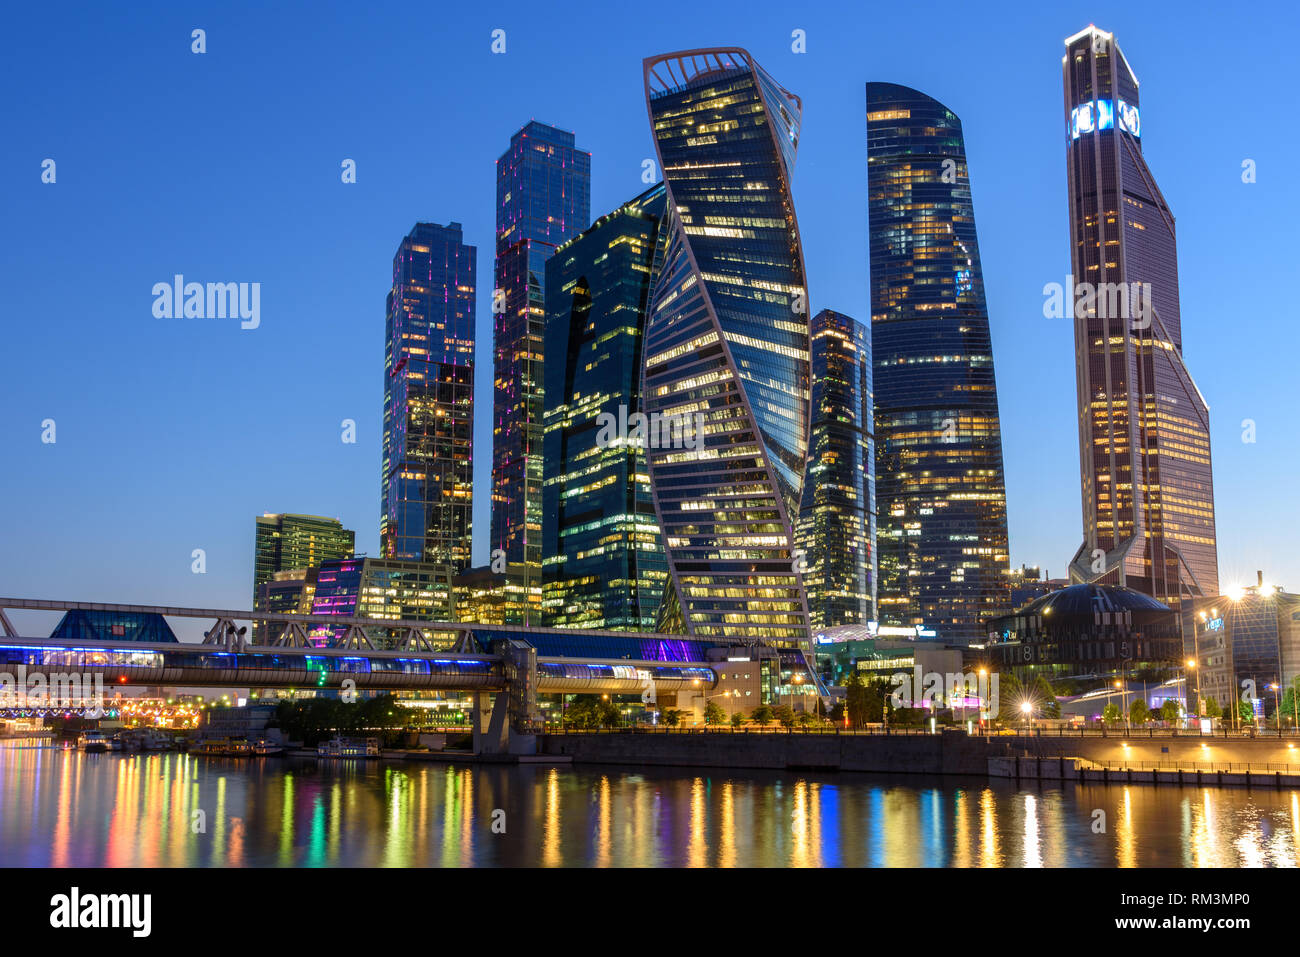 View of the buildings of the business district of Moscow - Moscow City Stock Photo